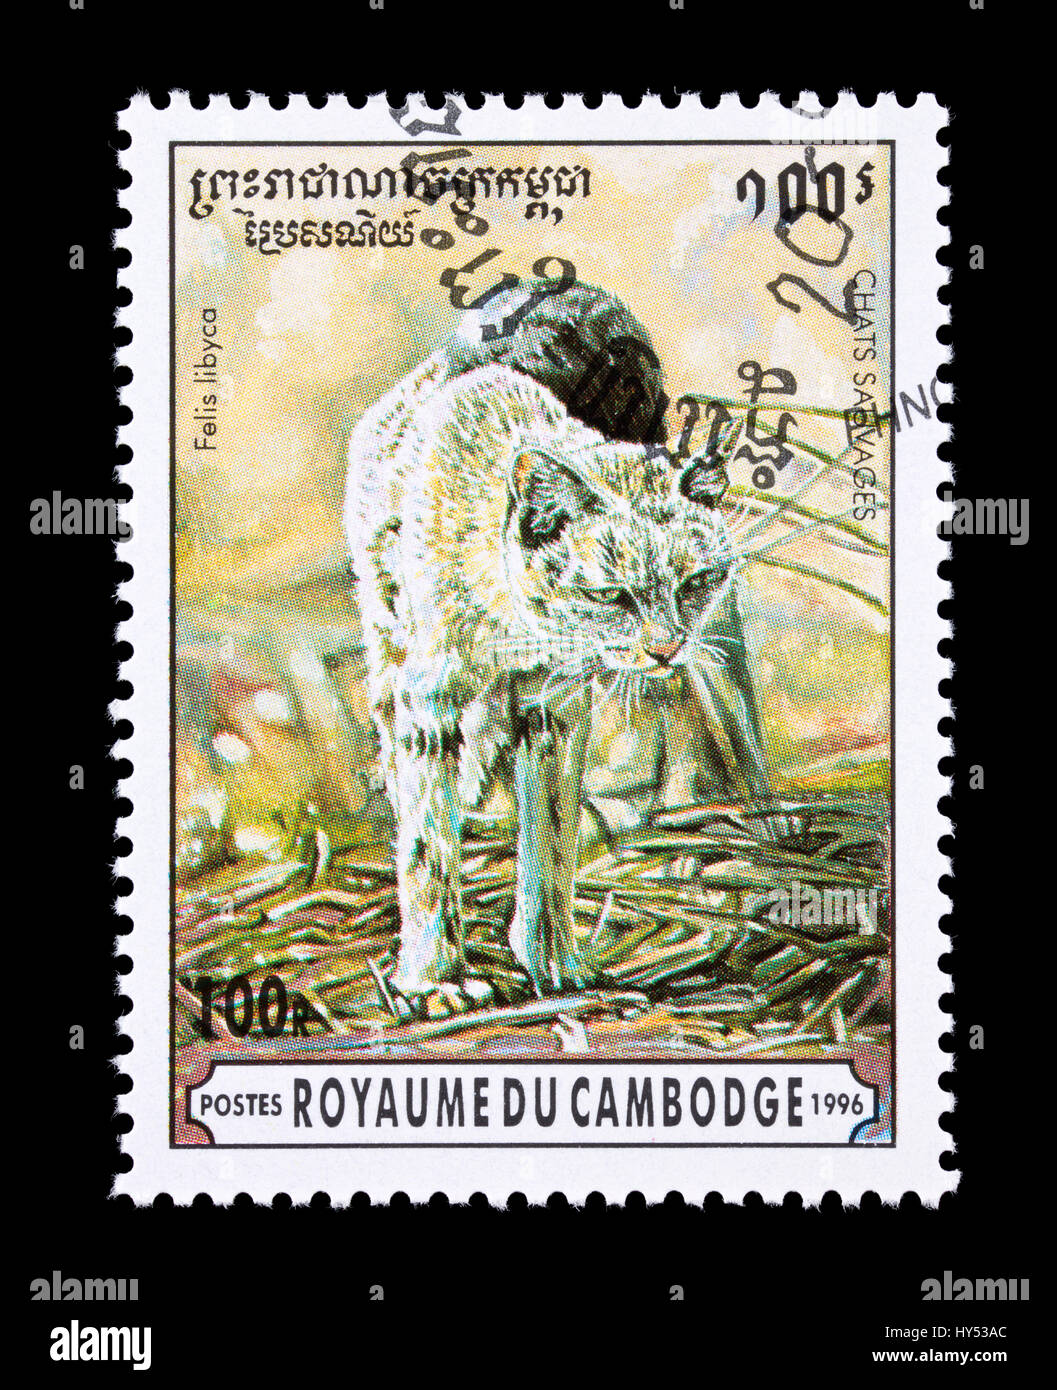 Postage stamp from Cambodia depicting a African wildcat (Felis silvestris lybica), Stock Photo